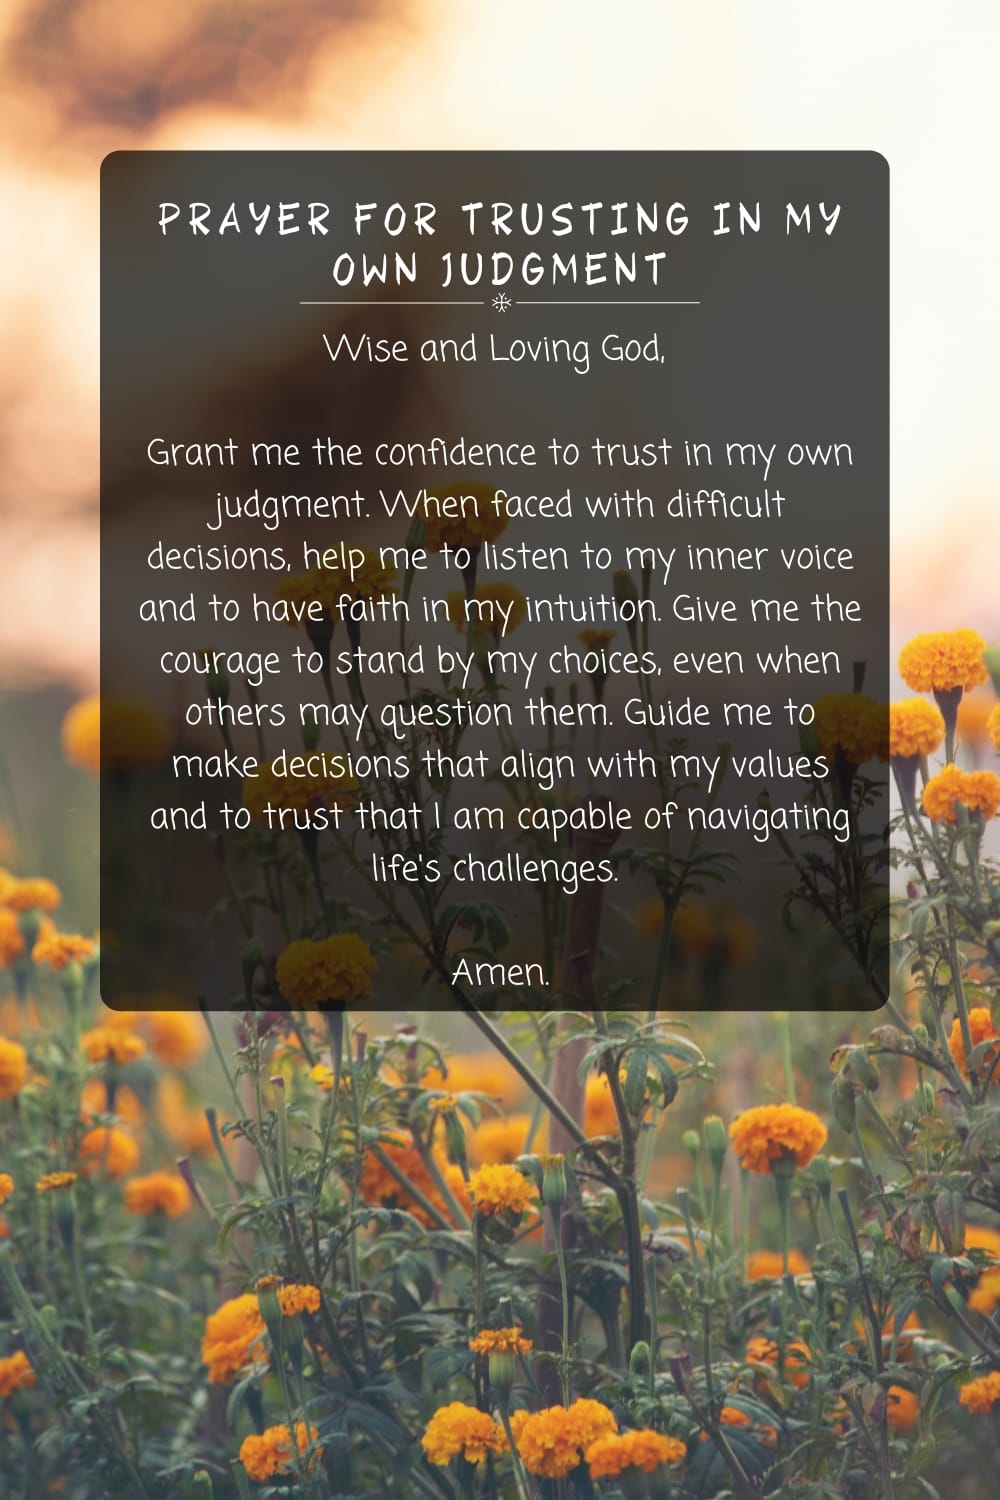 Prayer for Trusting in My Own Judgment